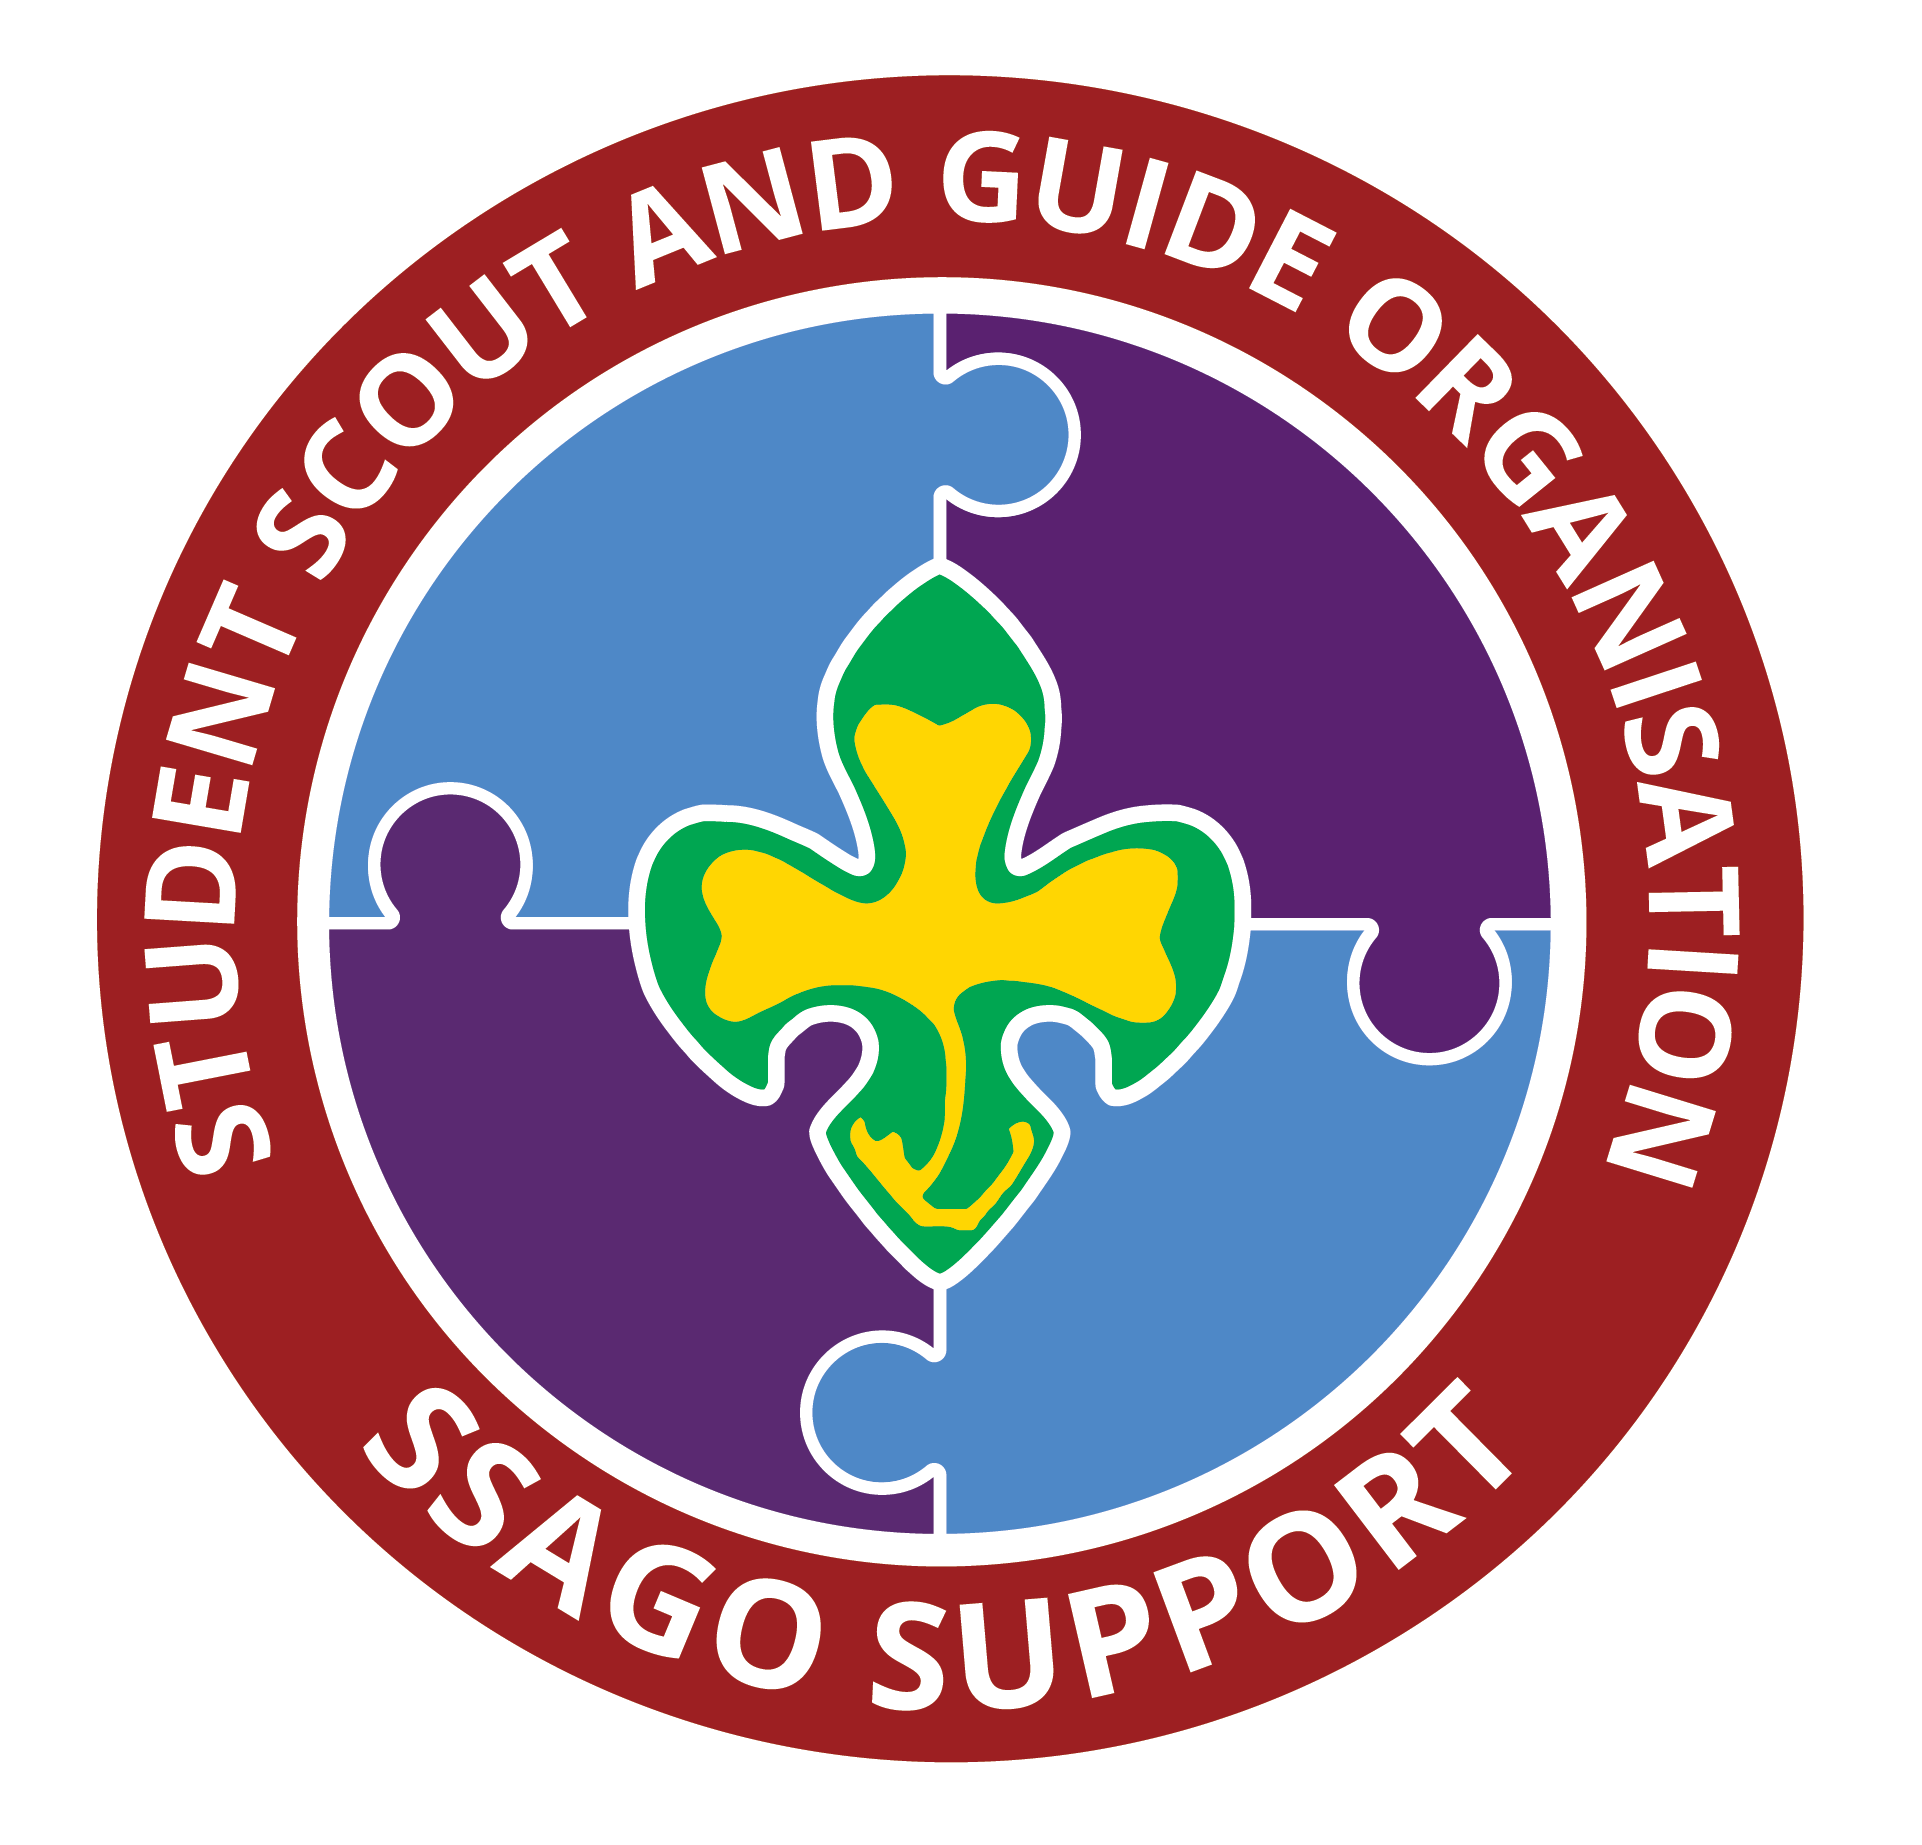 SSAGO Support Badge